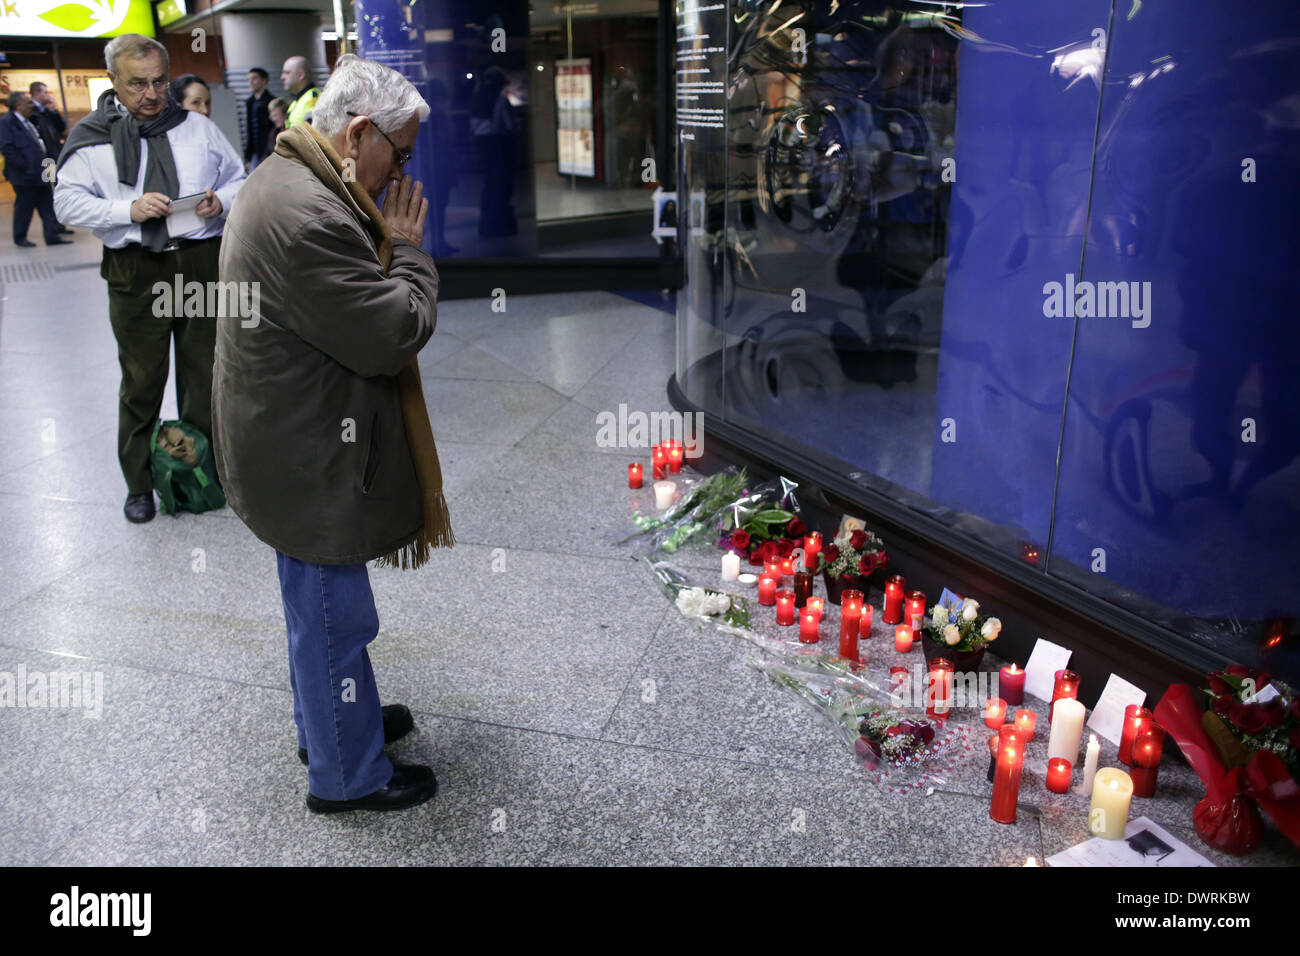 Madrid, Spain. 11th Mar, 2014. A man prays in front of Atocha's Bombing Memorial in Madrid, Spain, Tuesday March 11, 2014, in remembrance of those killed and injured in the Madrid train bombings, marking the 10th anniversary of Europe's worst Islamic terror attack. The attackers targeted four commuter trains with 10 shrapnel-filled bombs concealed in backpacks during morning rush hour on March 11, 2004. Credit:  Rodrigo Garcia/NurPhoto/ZUMAPRESS.com/Alamy Live News Stock Photo